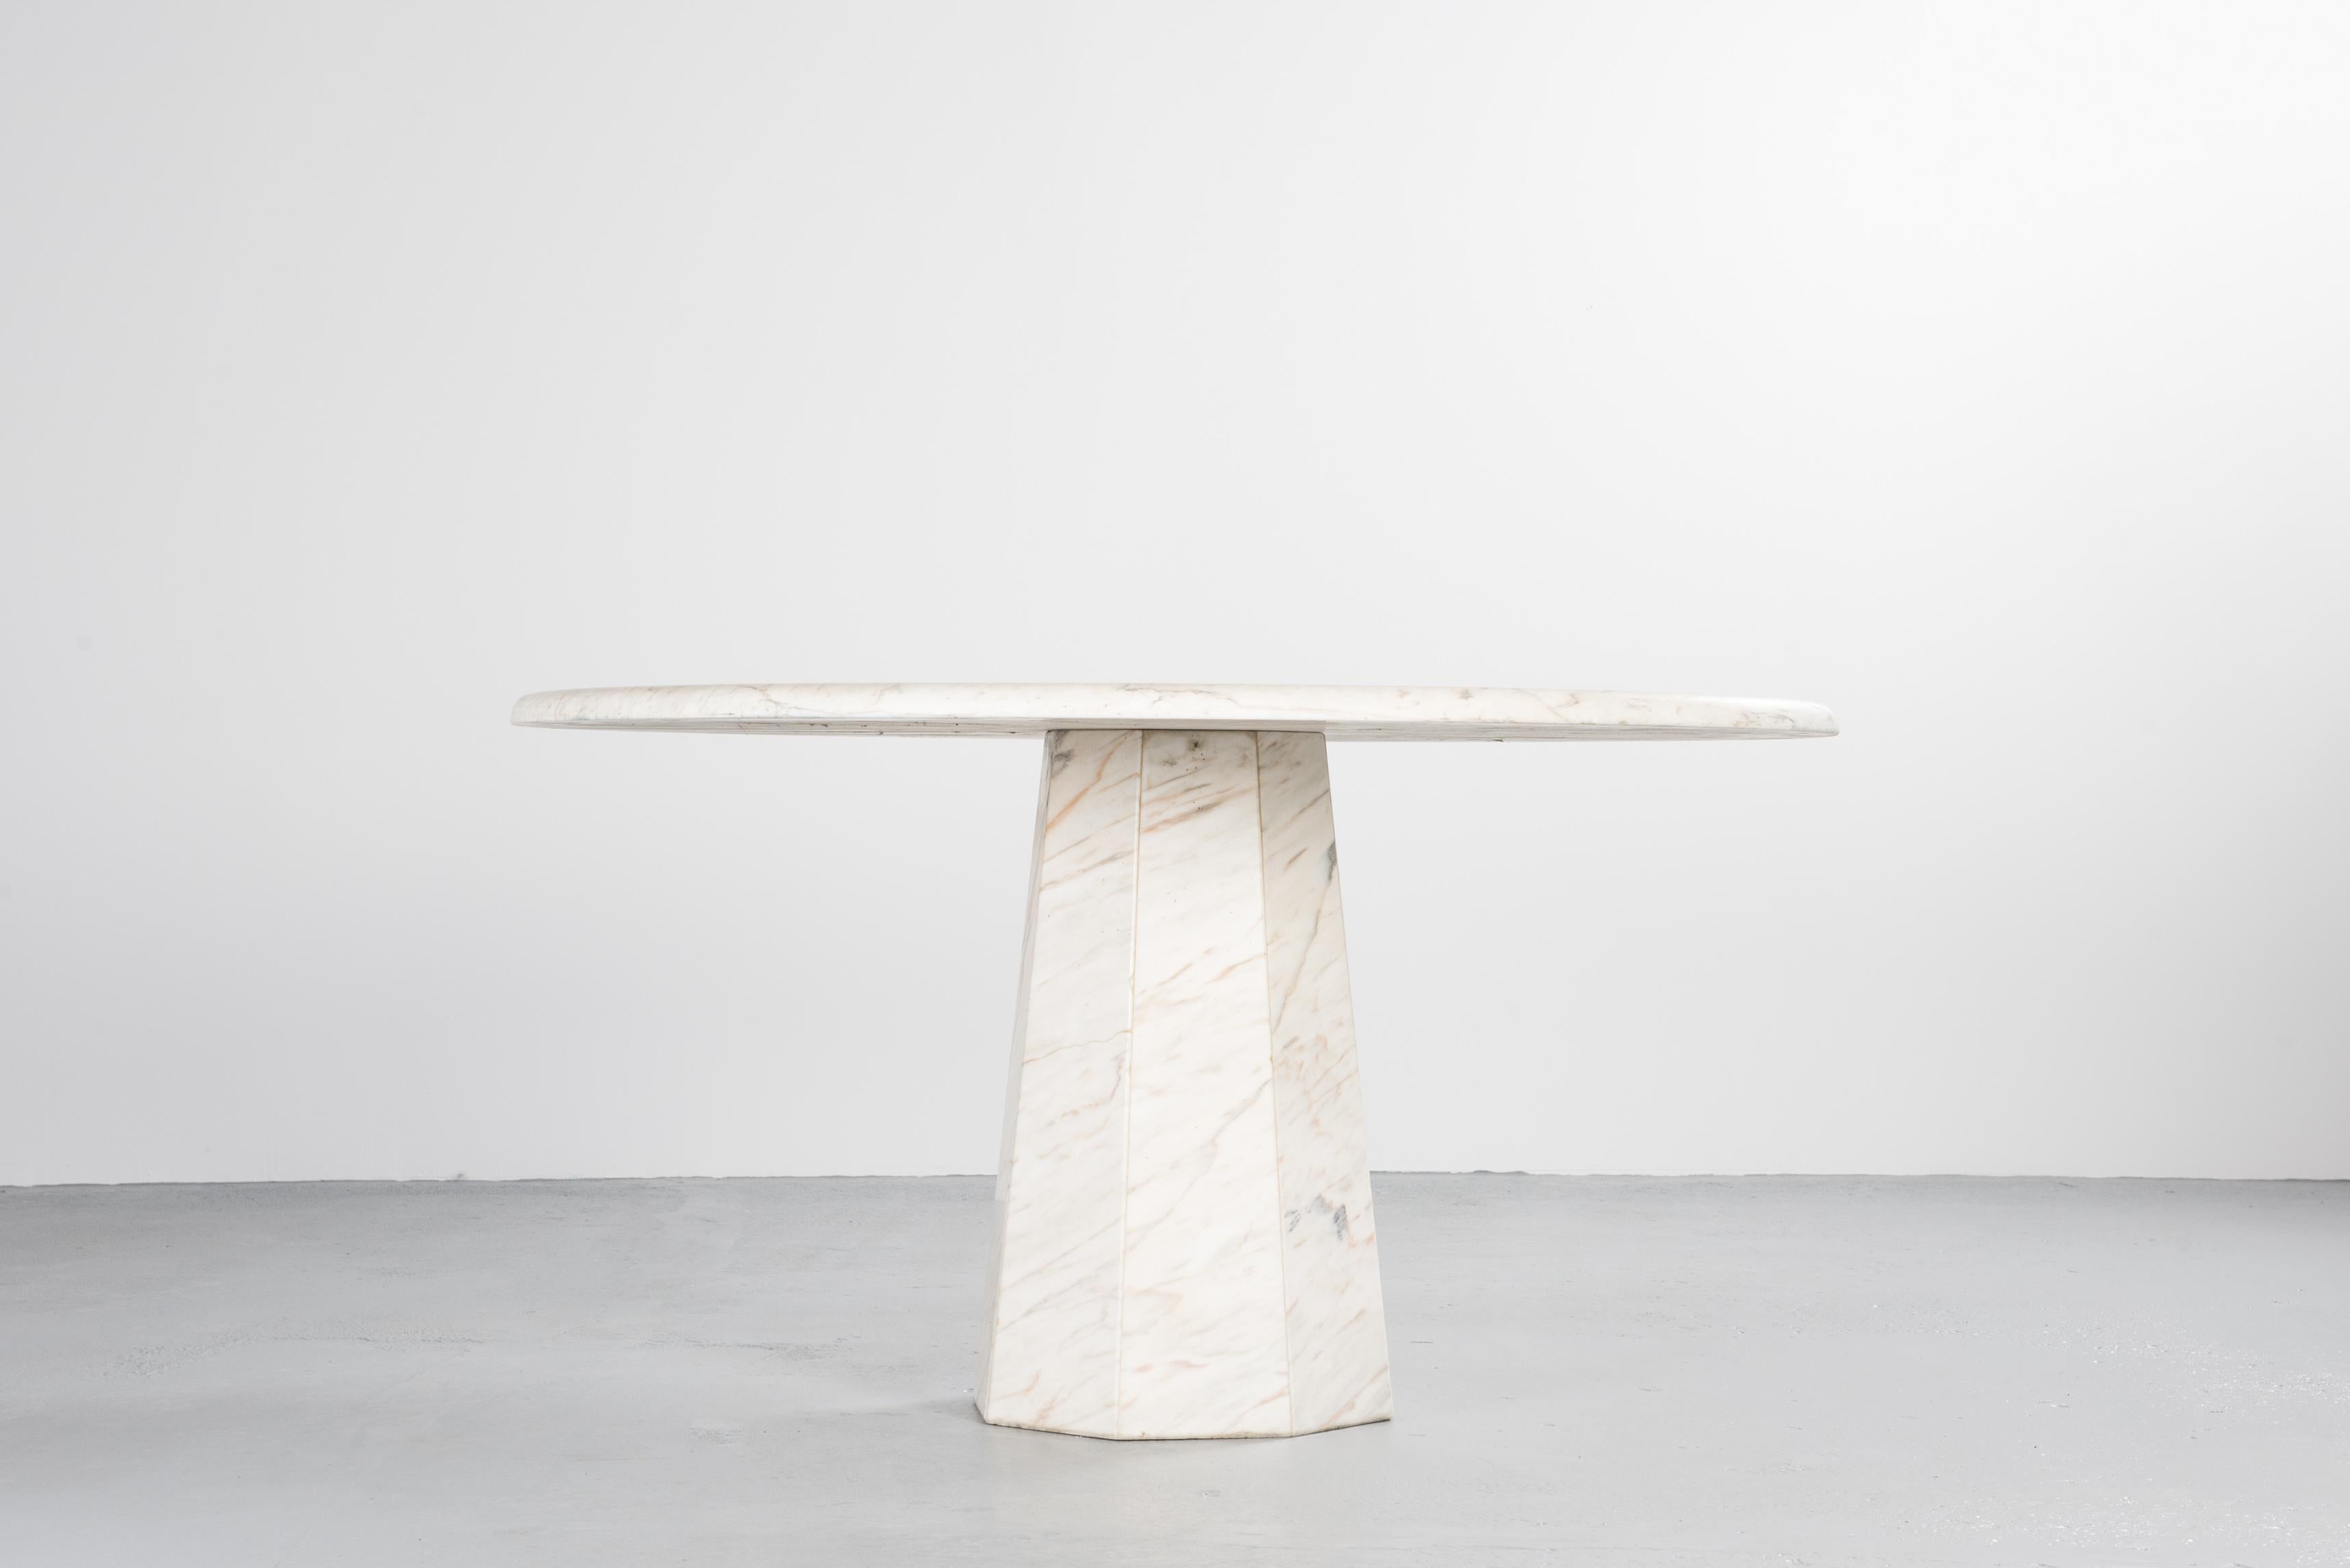 Chic Italian marble dining table

Round table with an octagonal base, all in white Italian marble.
Chic and yet minimalistic, traditional technique yet with a timeless look, this elegant dining table combines the unobtrusiveness of design and the